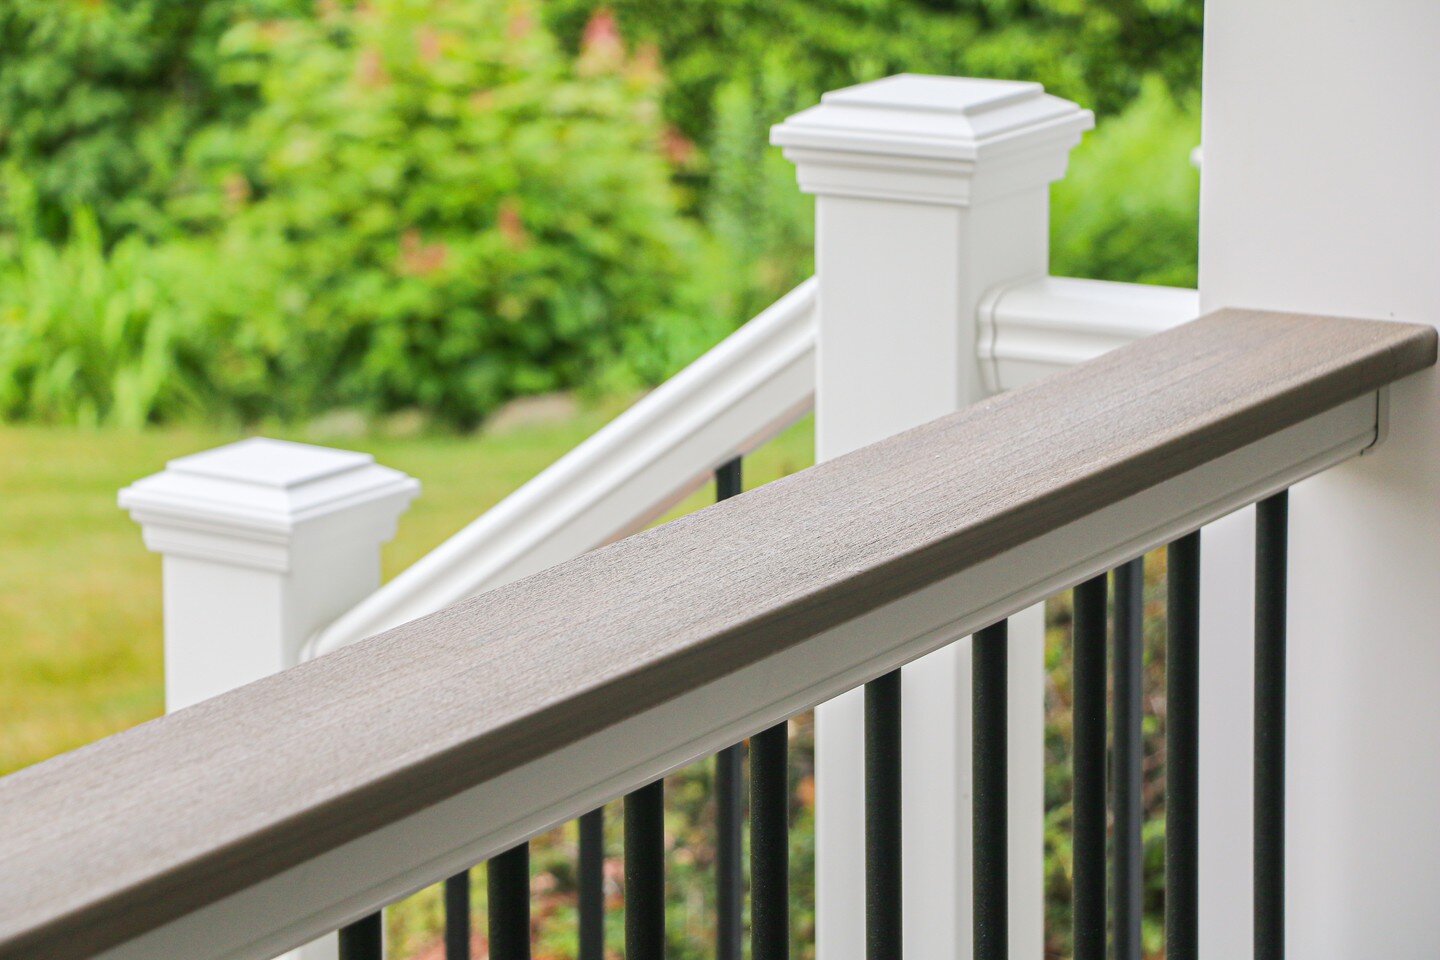 We can't get enough of these beautiful Cocktail rails! 

We used Trex Transcend Lineage in the color Biscayne.

#trexdecking #royalbuildingproducts #makingdreamshappen